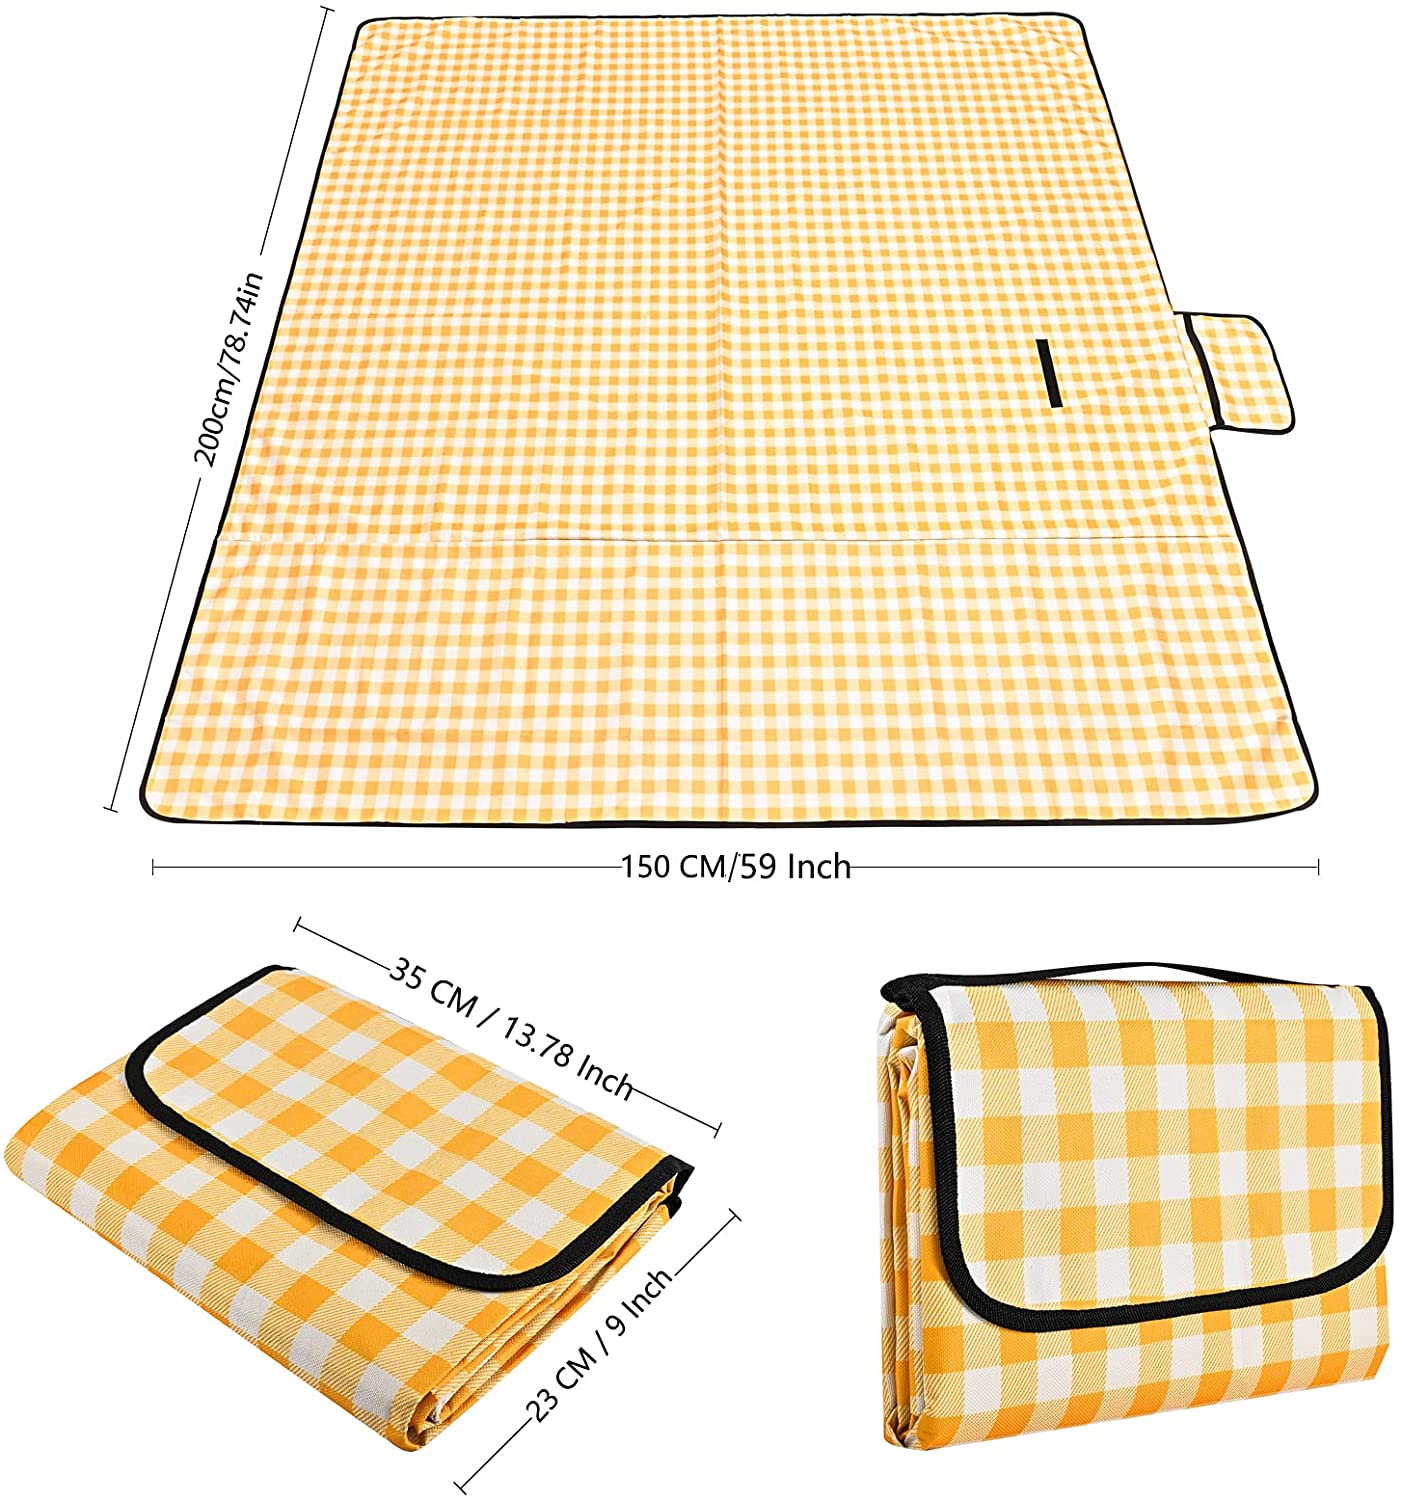 Outdoor Picnic Blanket, Foldable Outdoor Beach Blanket, Waterproof, Sandproof, Anti-Slip With Handle, Suitable For Home, Beach, Park, Hiking, Camping (150*200cm) Wintory